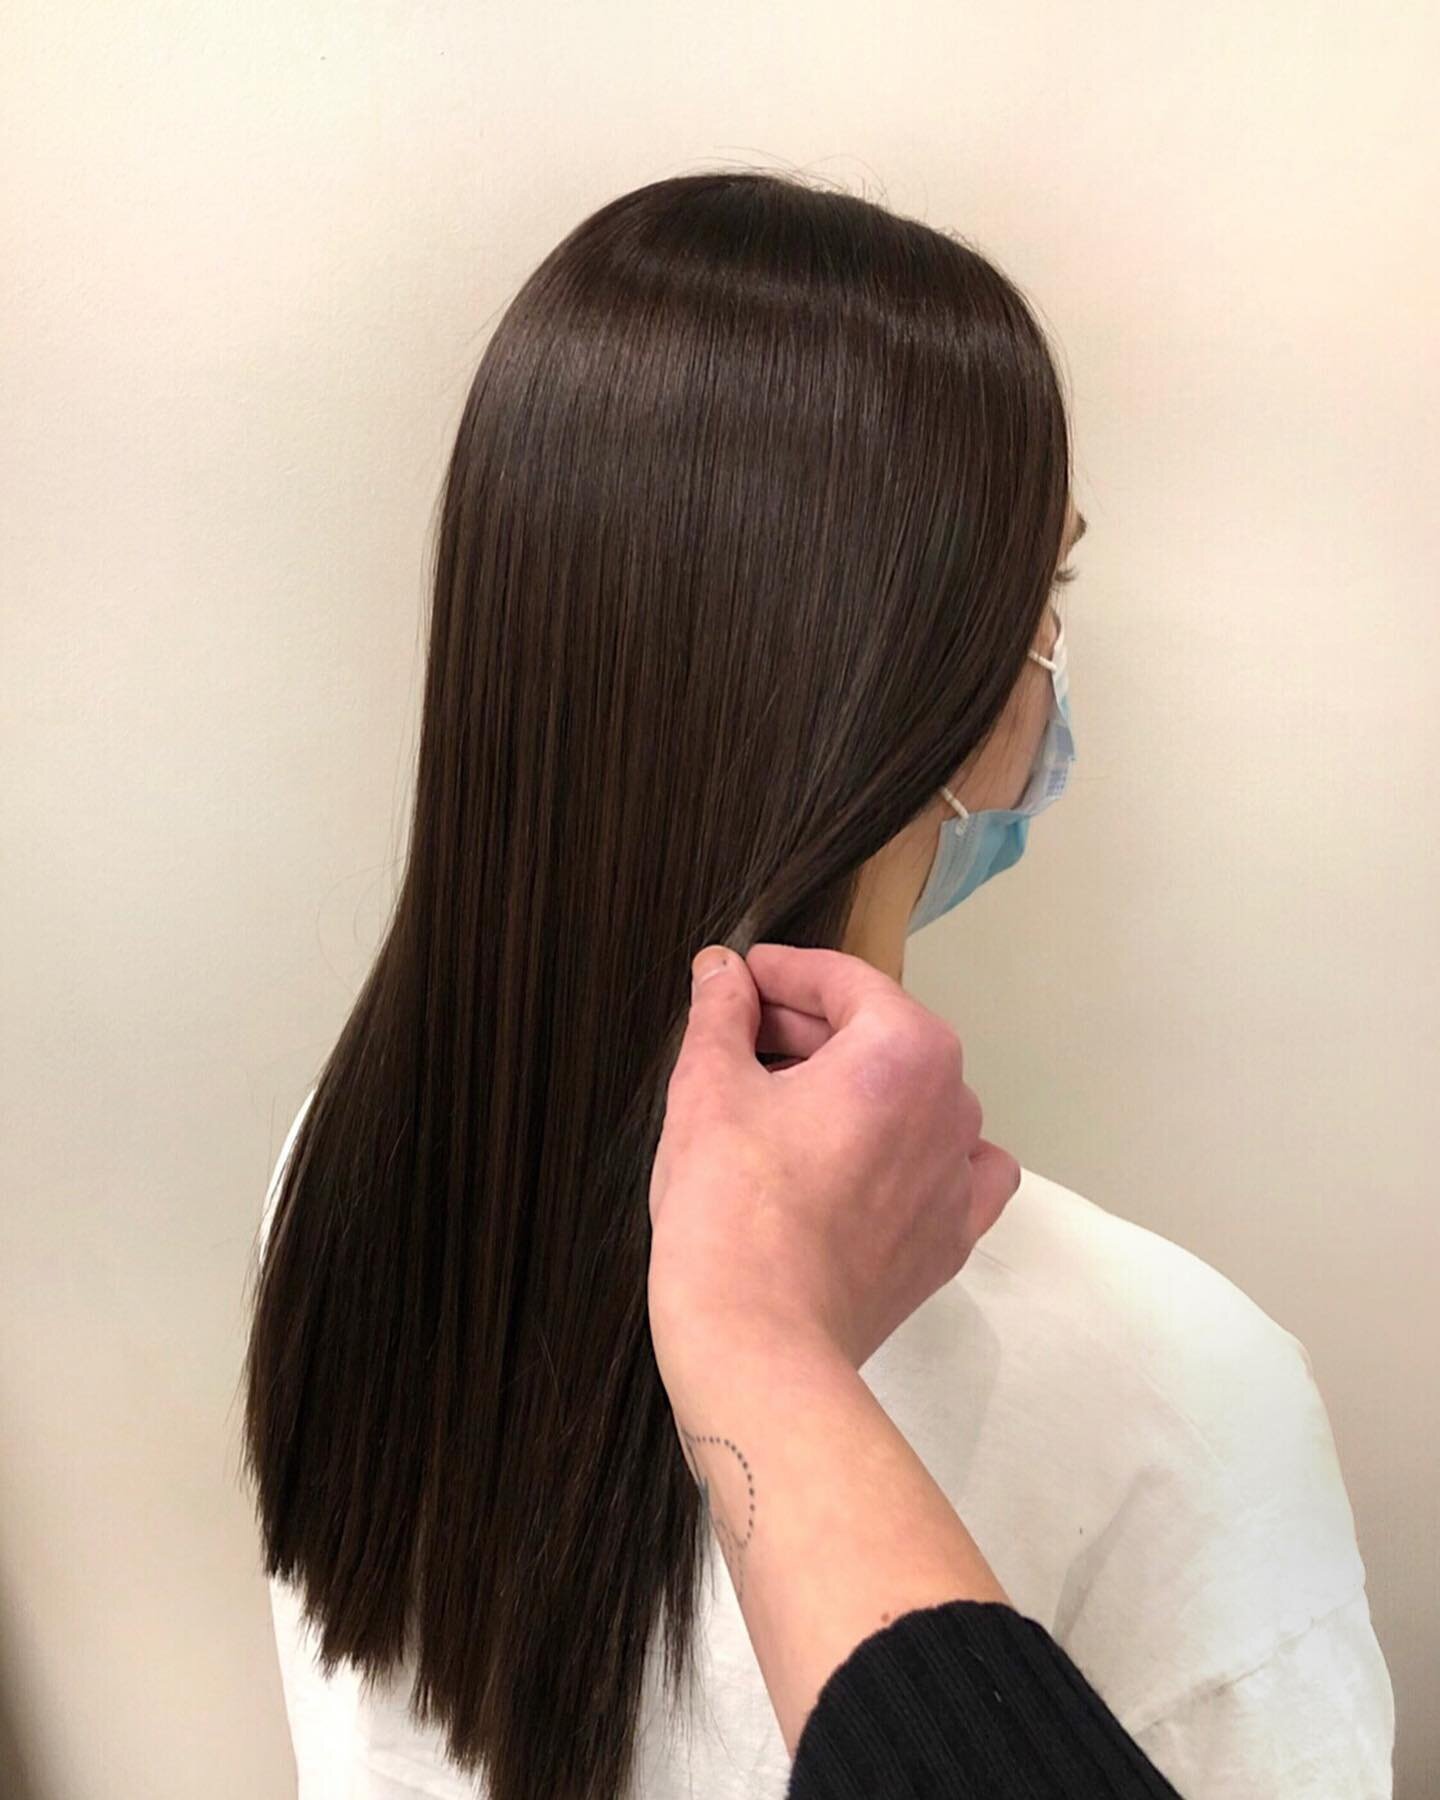 Who has been in the mood to make a big change to their hair? Swipe to see the before of this major transformation ➡️

This beauty was ready to take her blonde balayage to a beautiful brunette. The end result looked so shiny and healthy! 😍